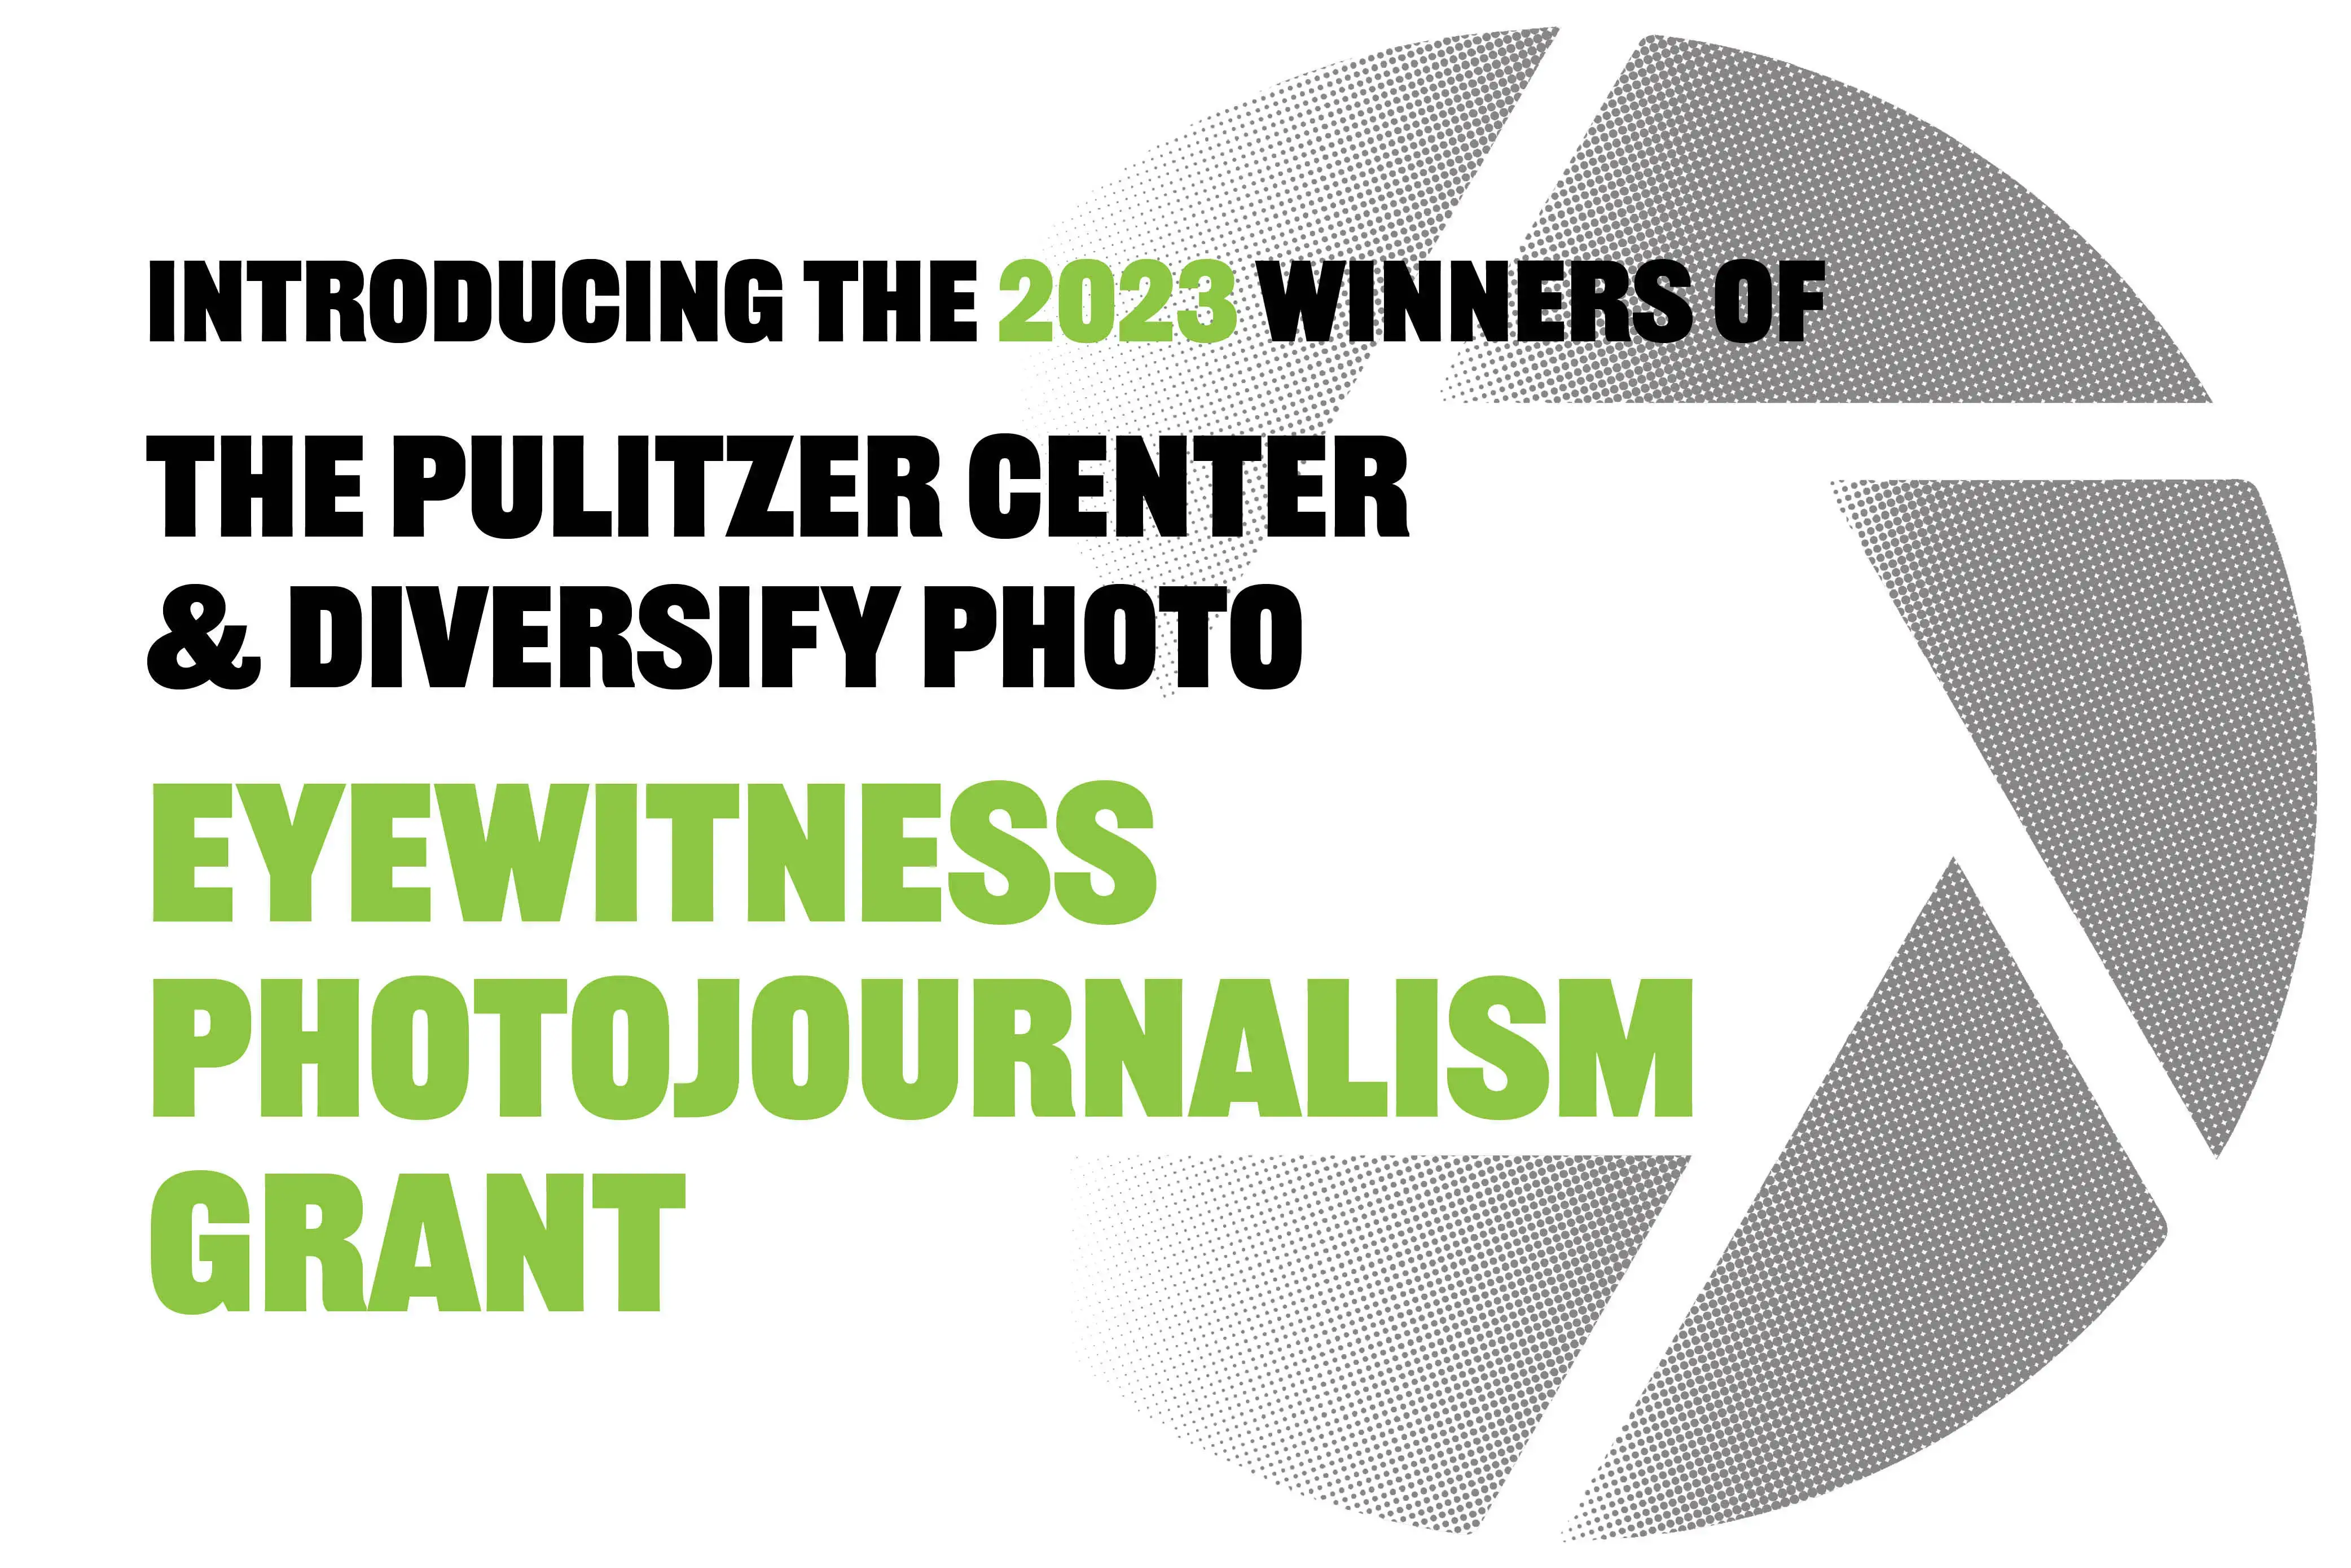 Introducing the 2023 winners of the Pulitzer Center & Diversify Photo Eyewitness Photojournalism Grant